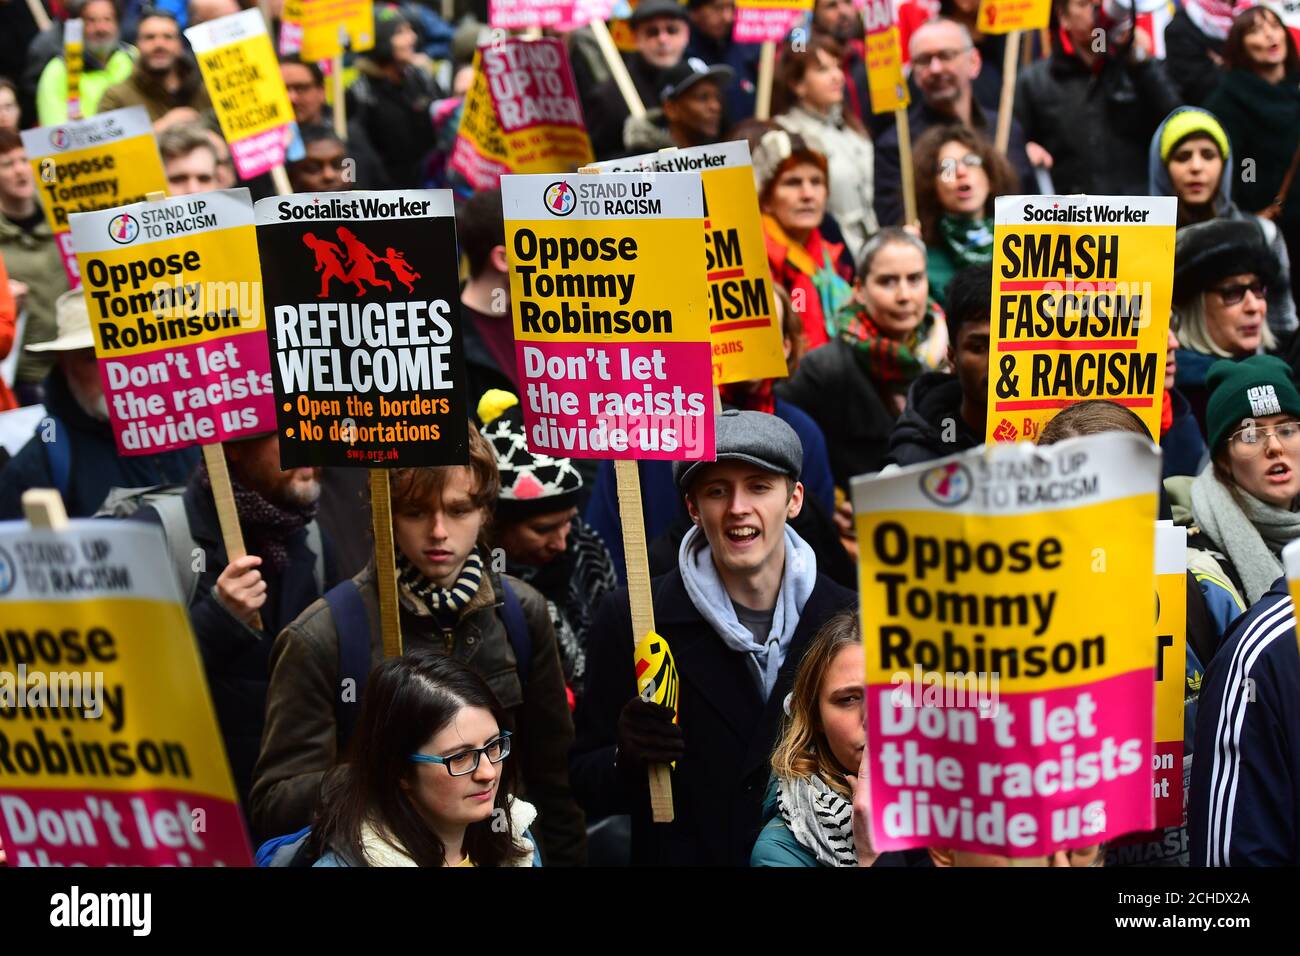 People hold placards opposing Tommy Robinson as they take part in an anti-fascist counter-demonstration against a 'Brexit Betrayal' march and rally organised by Ukip in central London. Stock Photo